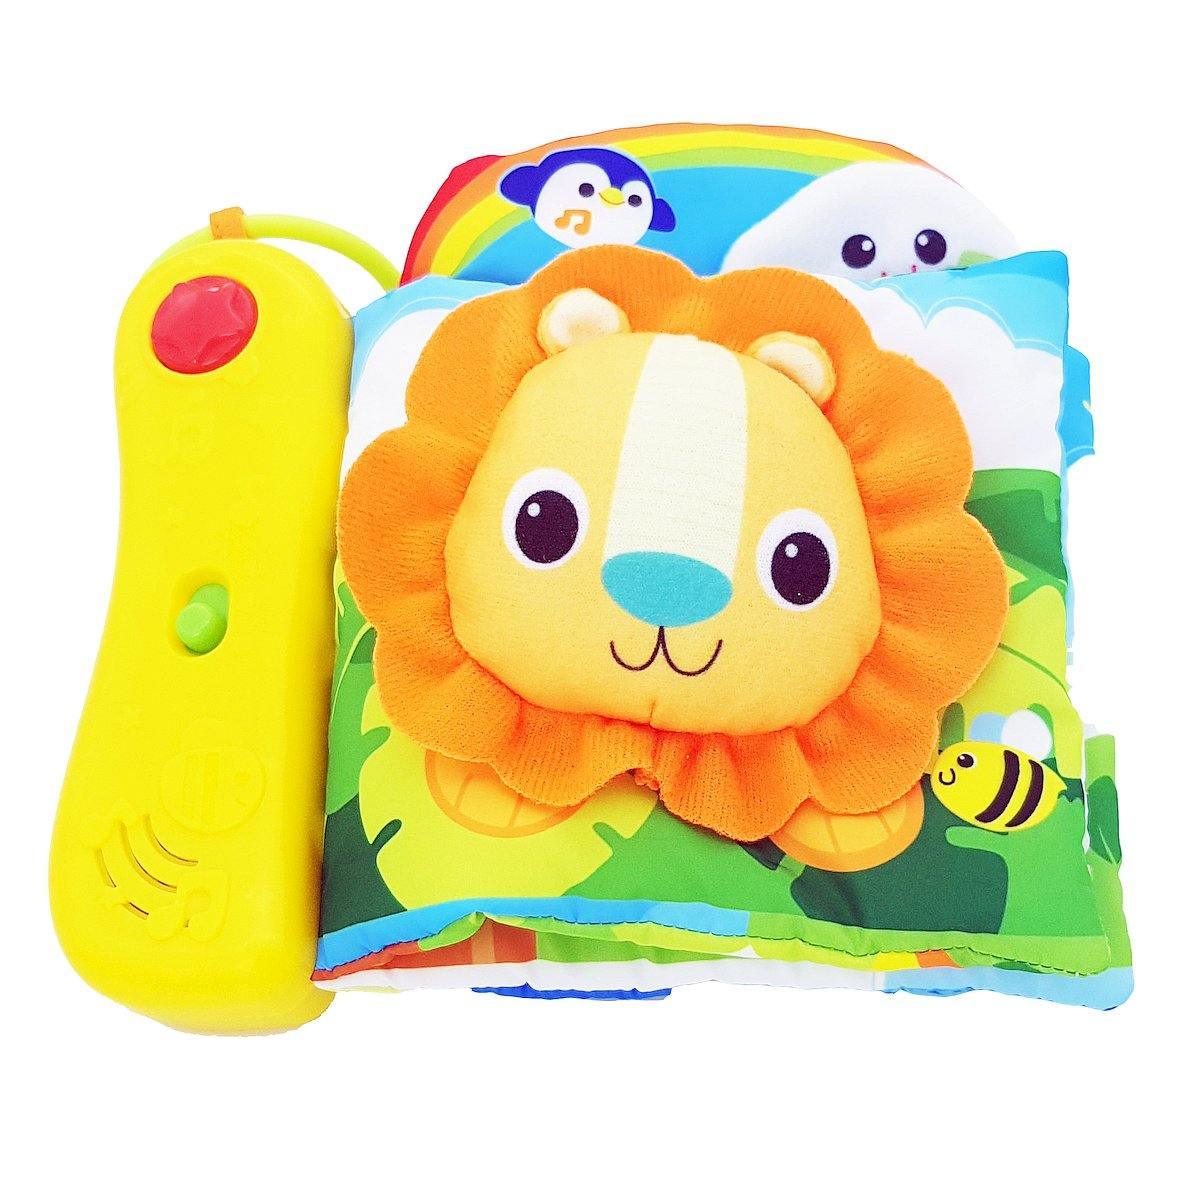 WinFun Jungle Pals Sensory Book - BumbleToys - 2-4 Years, Cecil, Learning Toys, Unisex